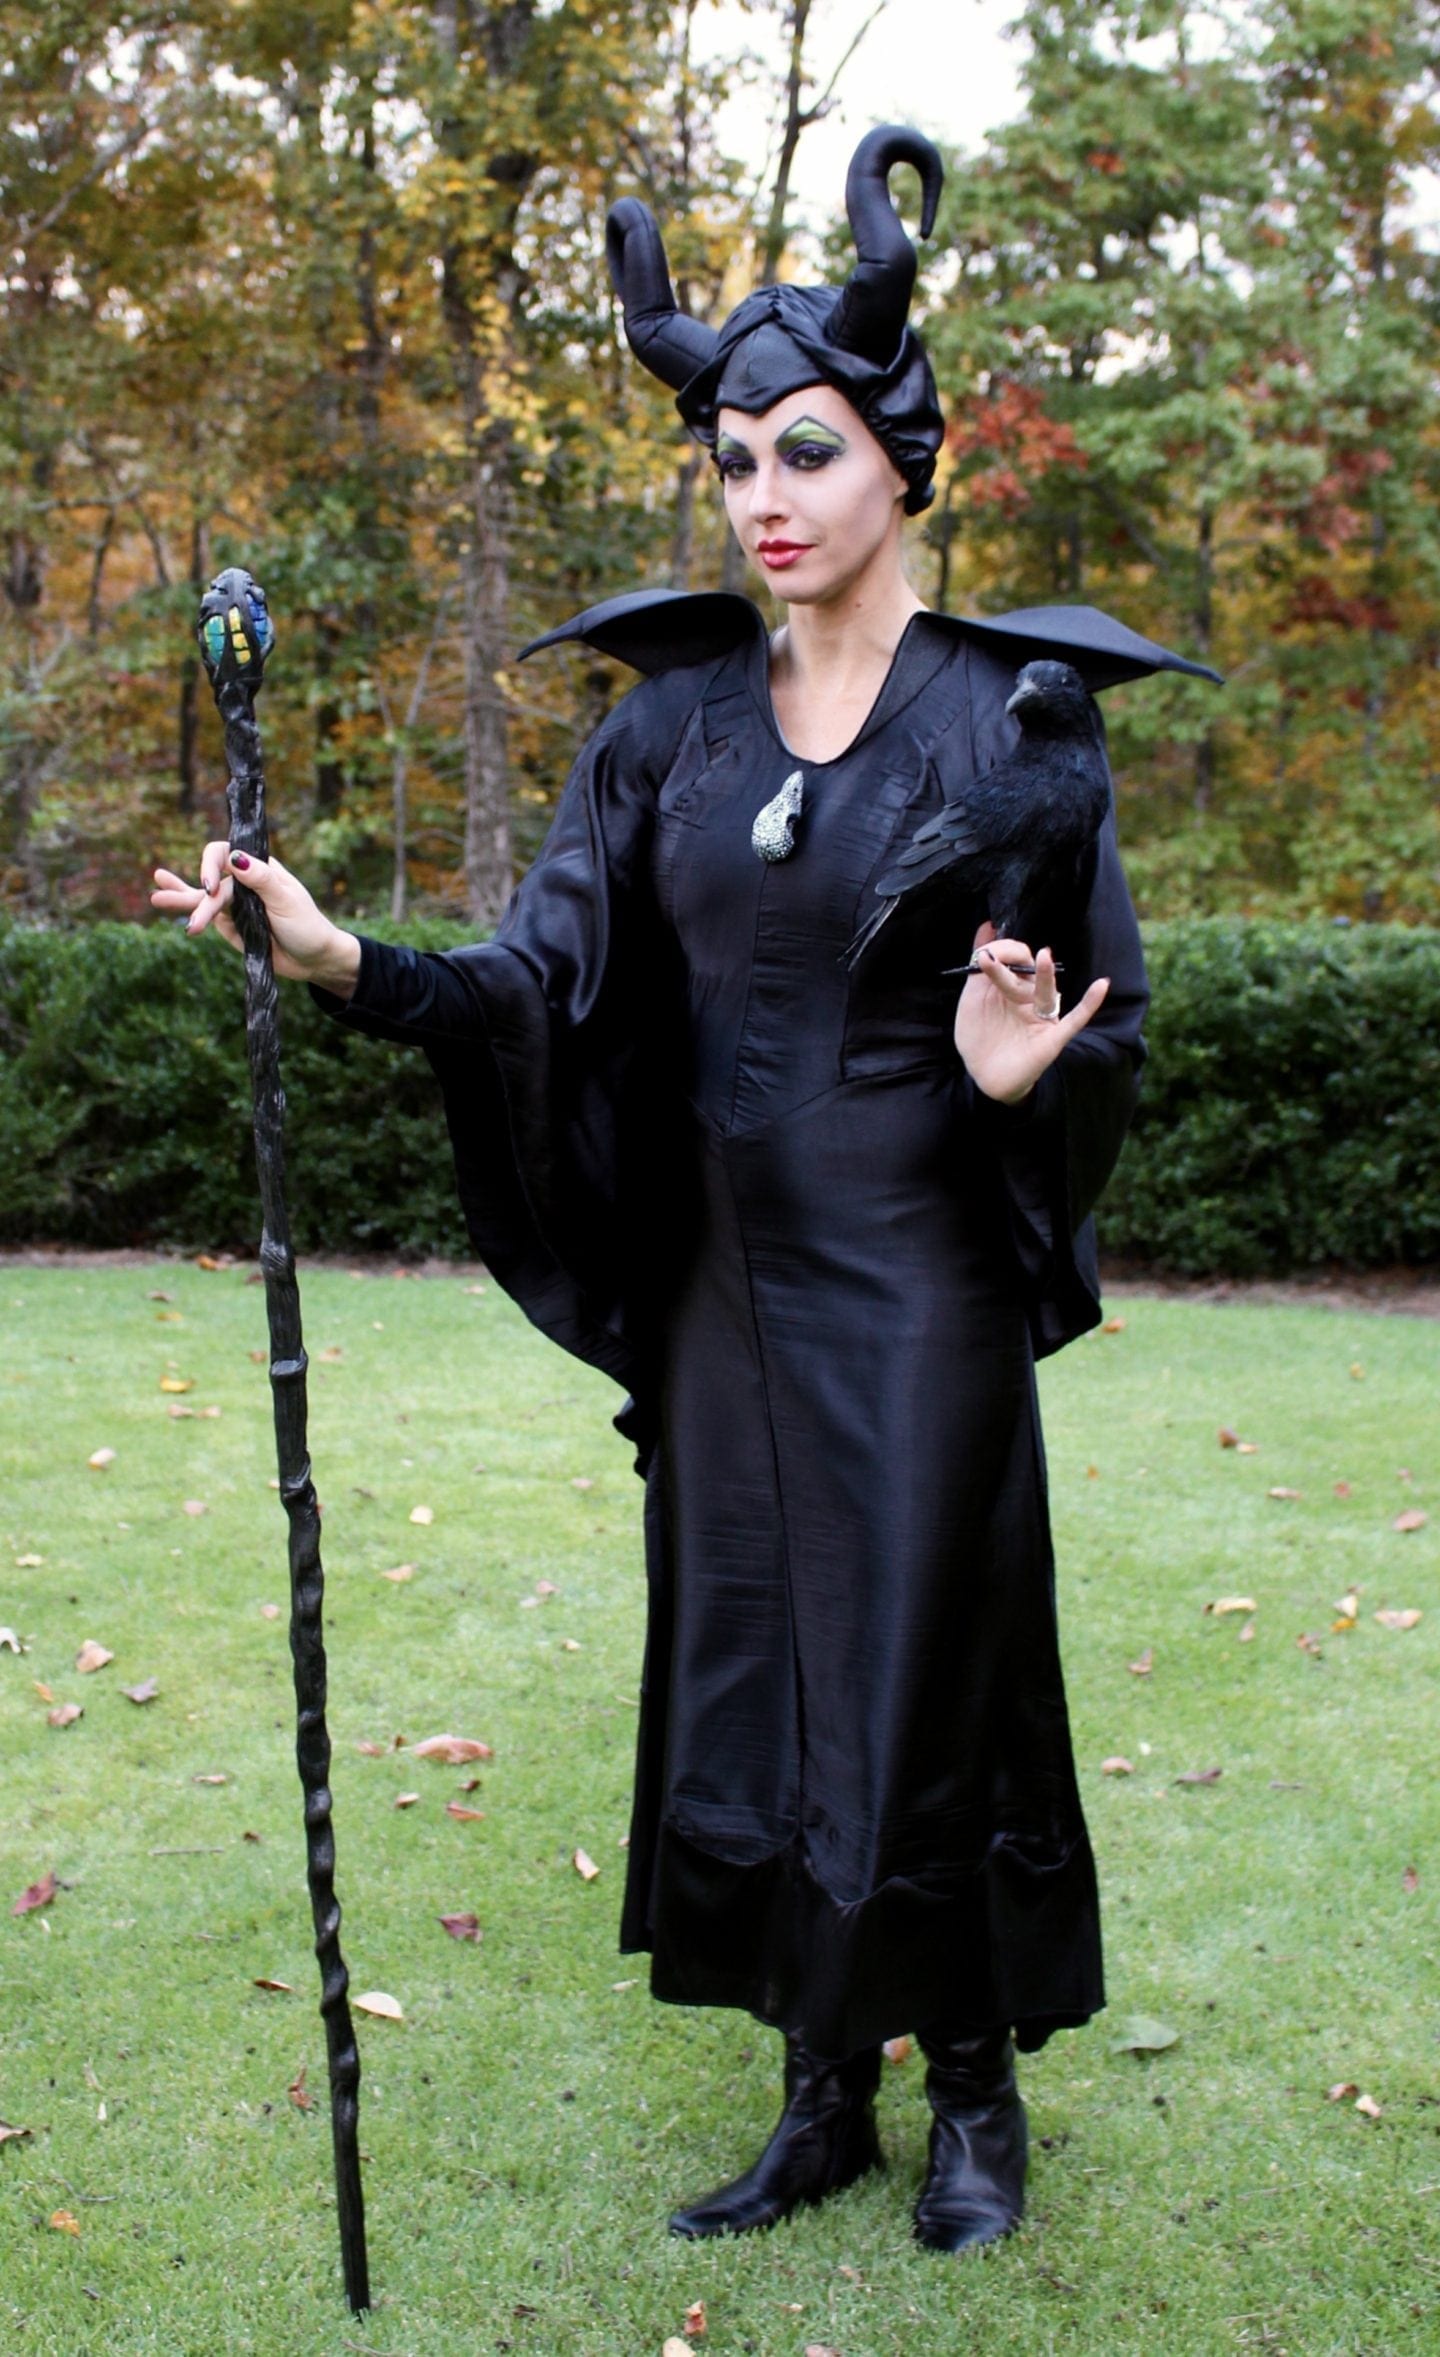 In a Hurry? A Quick & Cheap Maleficent Costume!